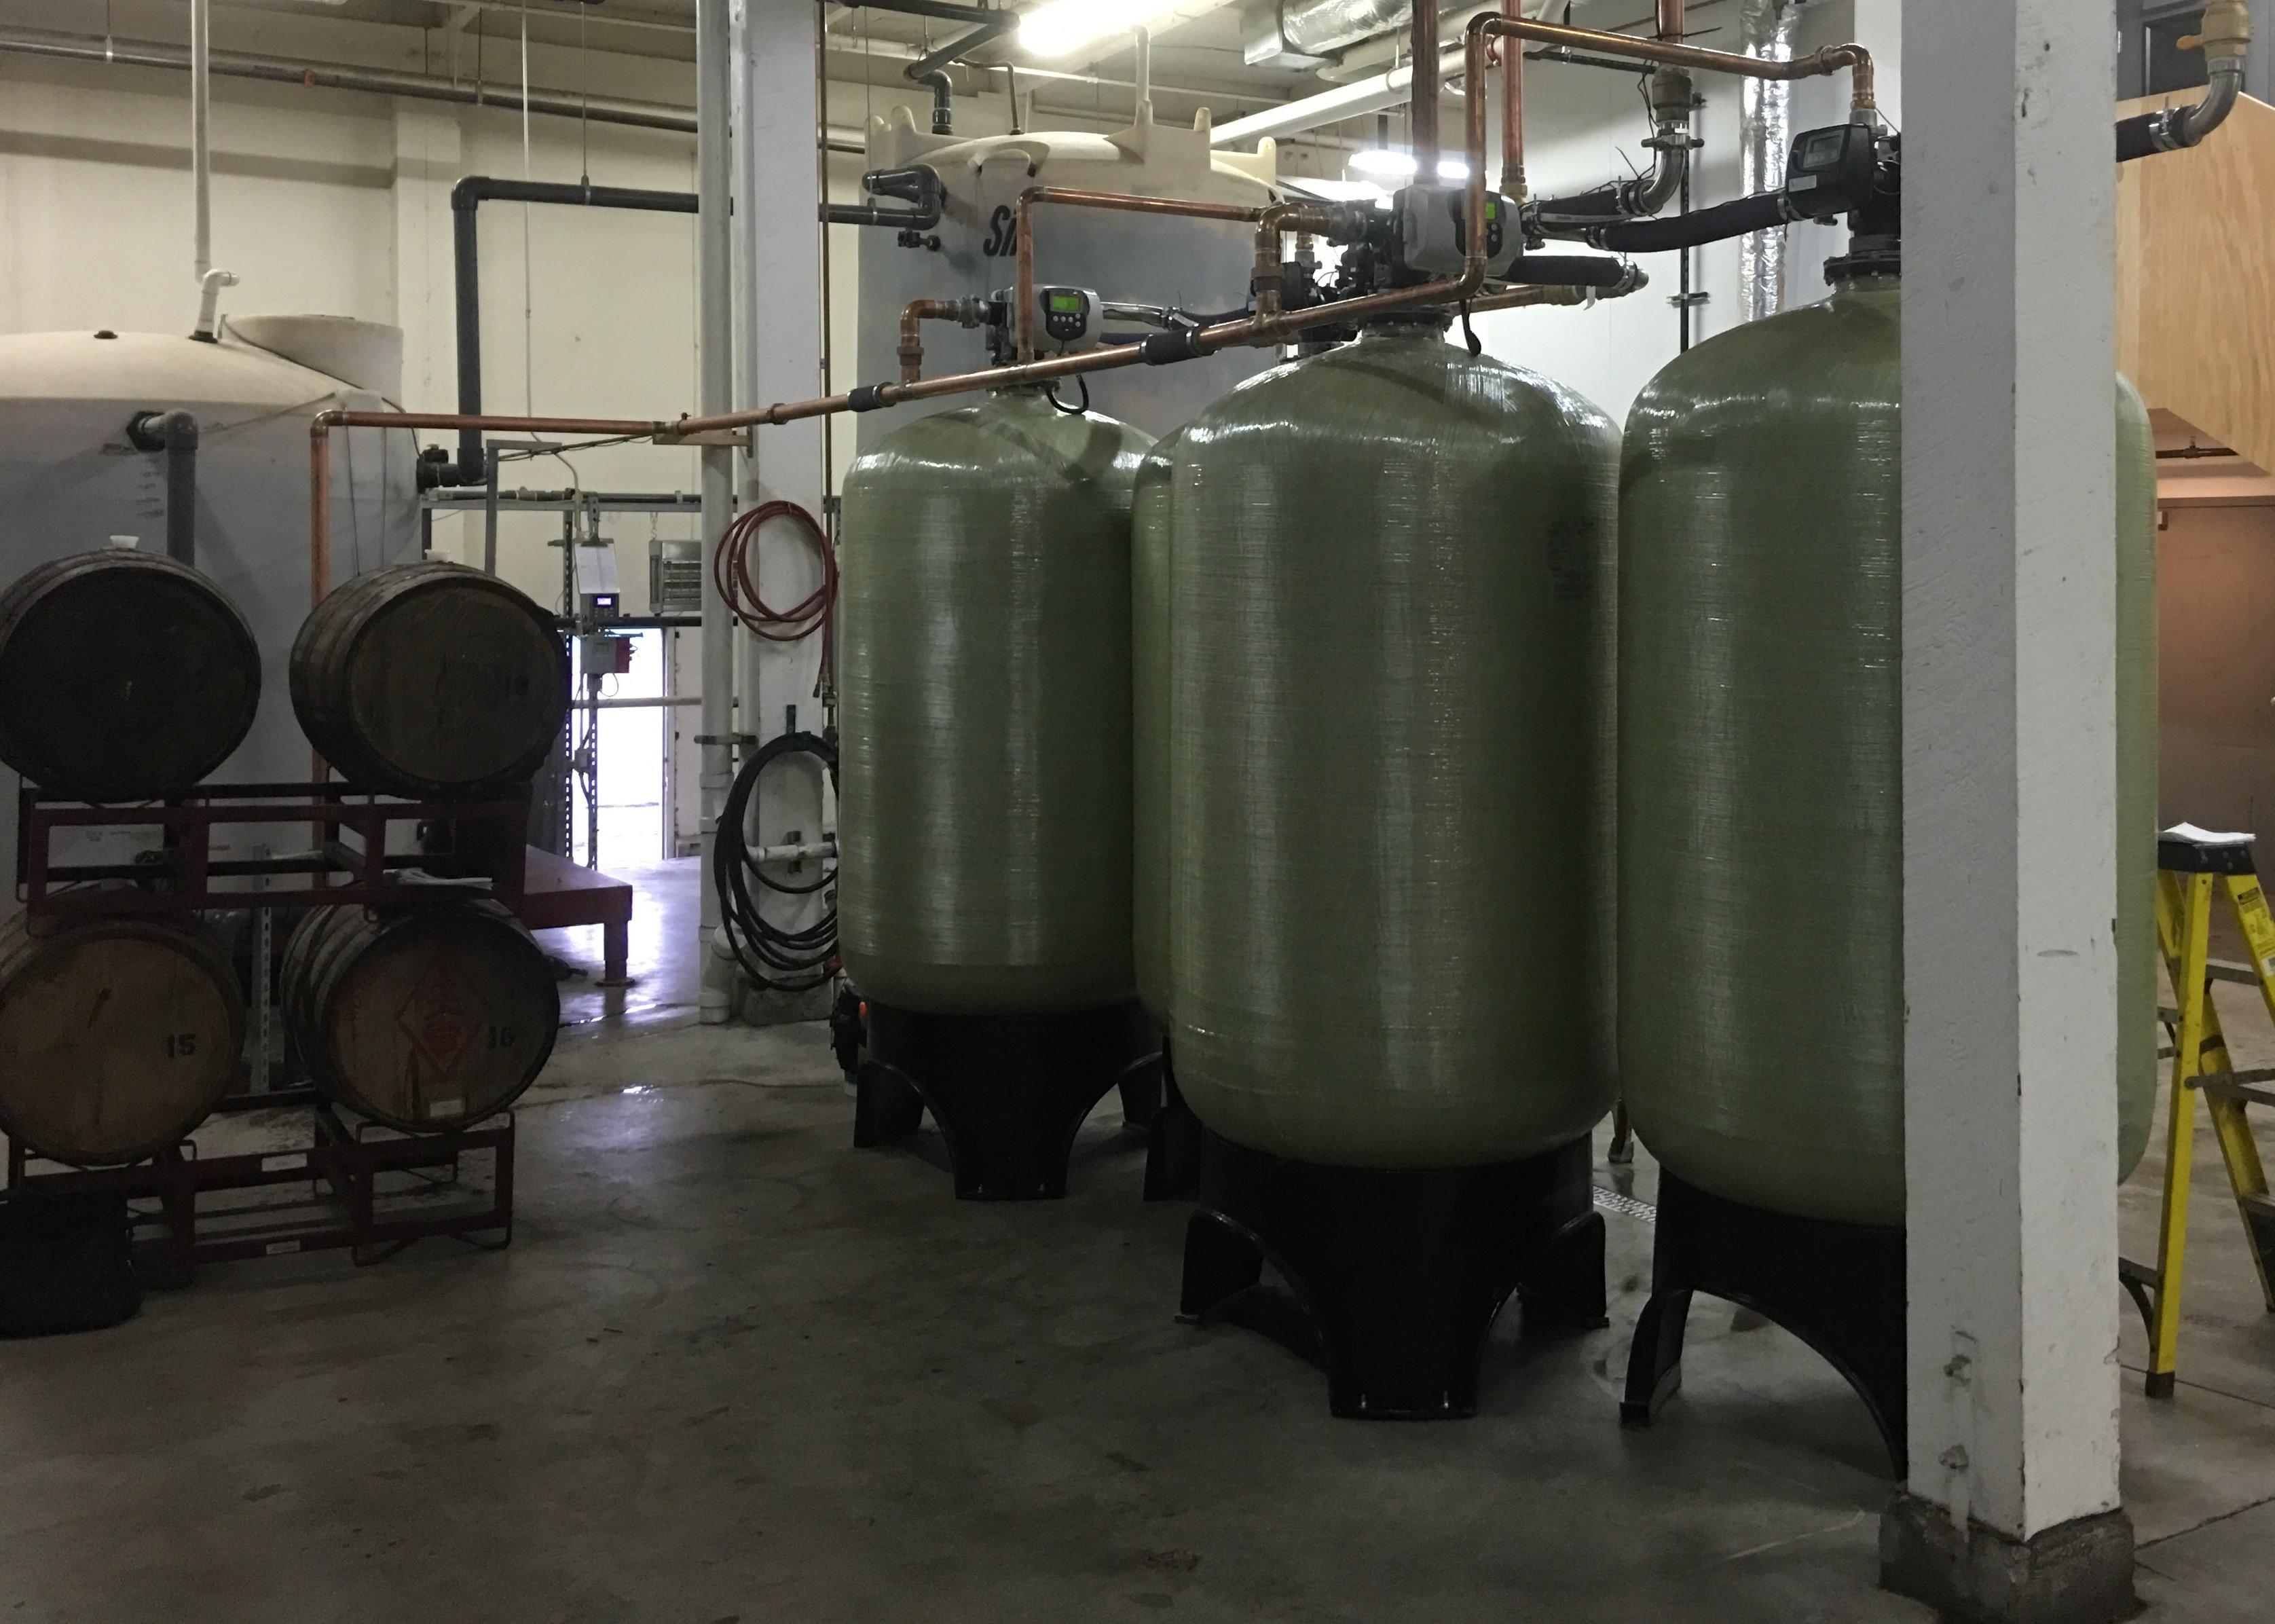 Water filtration system removes sediment and chlorine for a popular Seattle brewery.